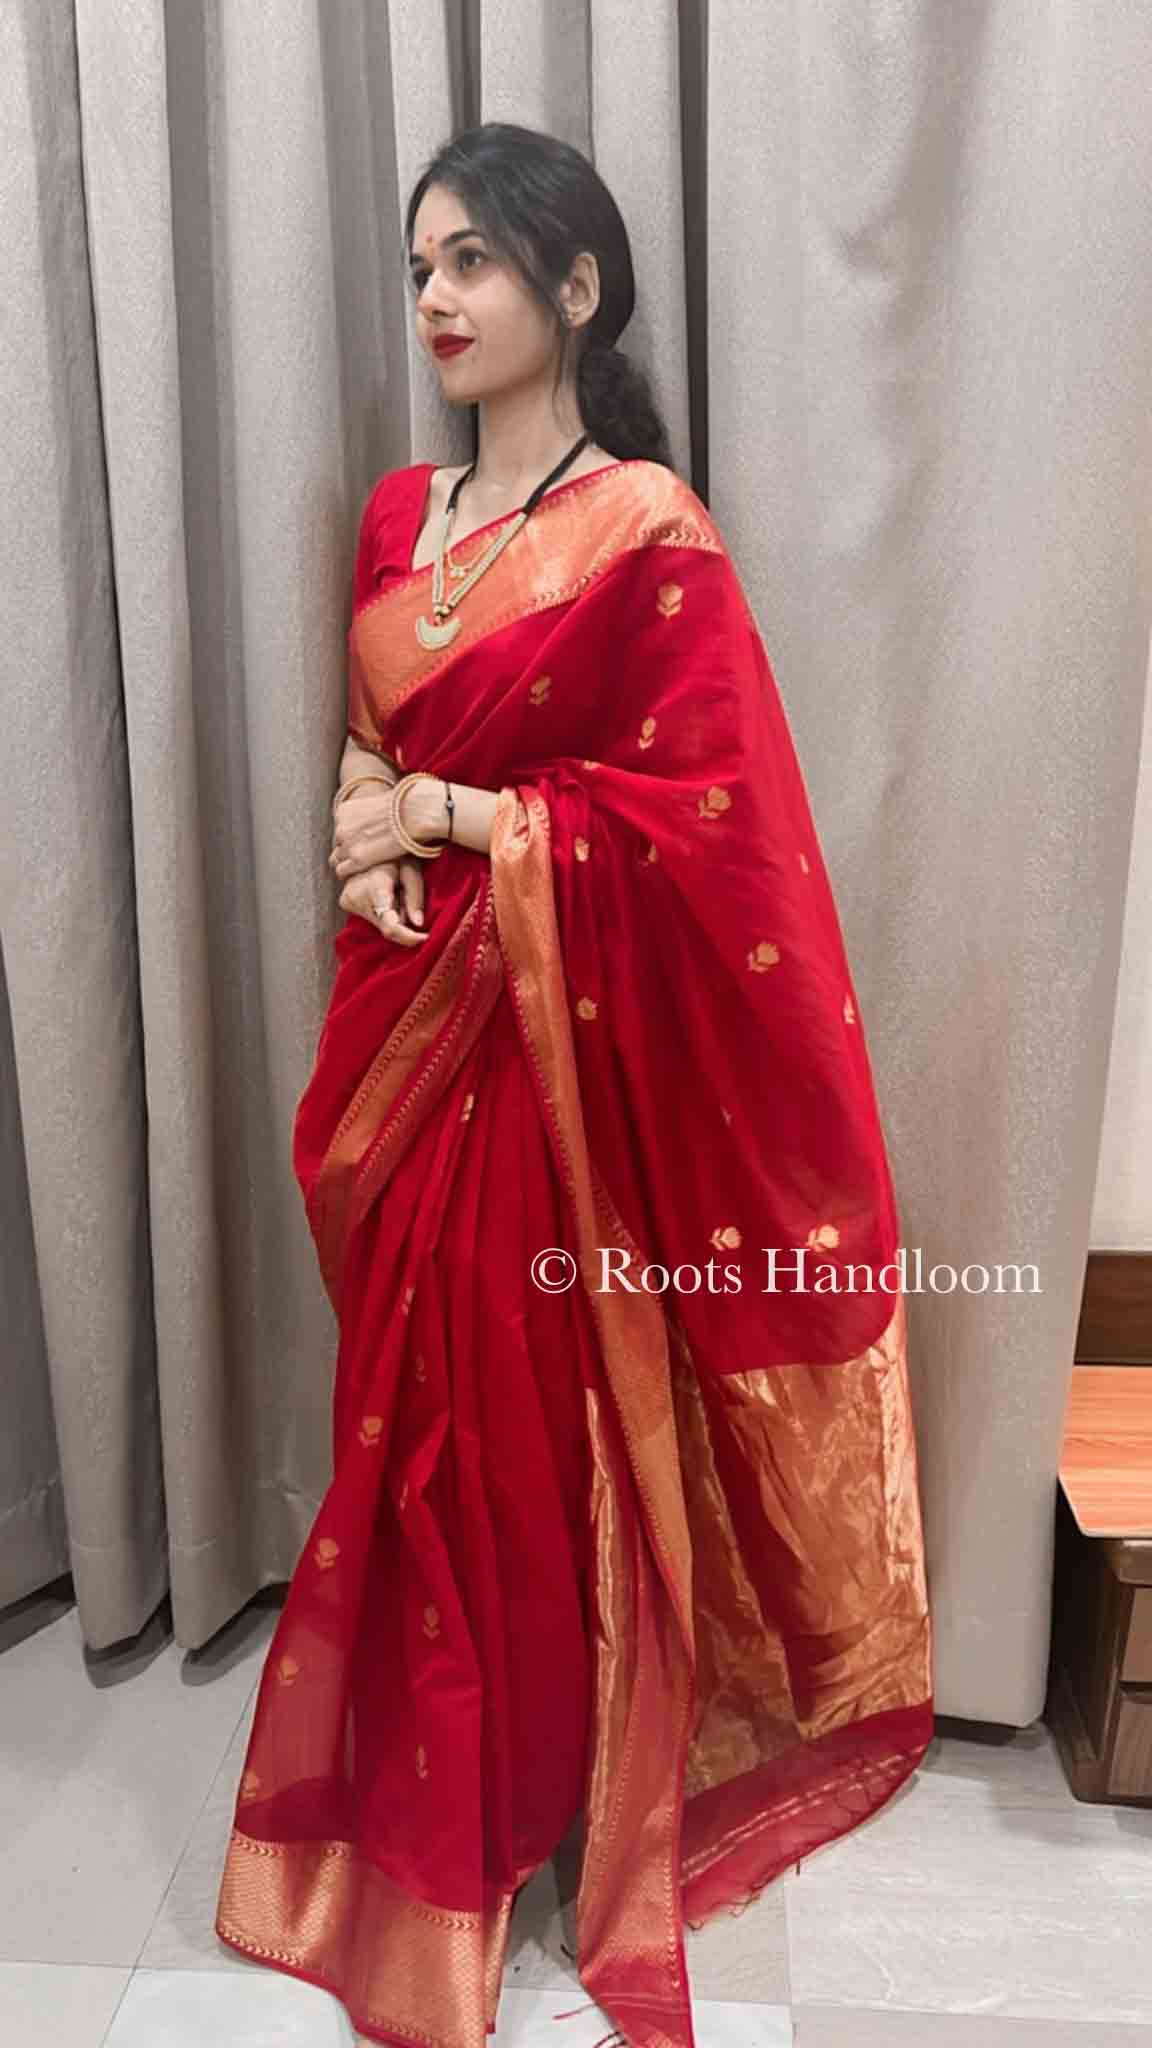 Red Maheshwari Saree with Flower Motifs all over